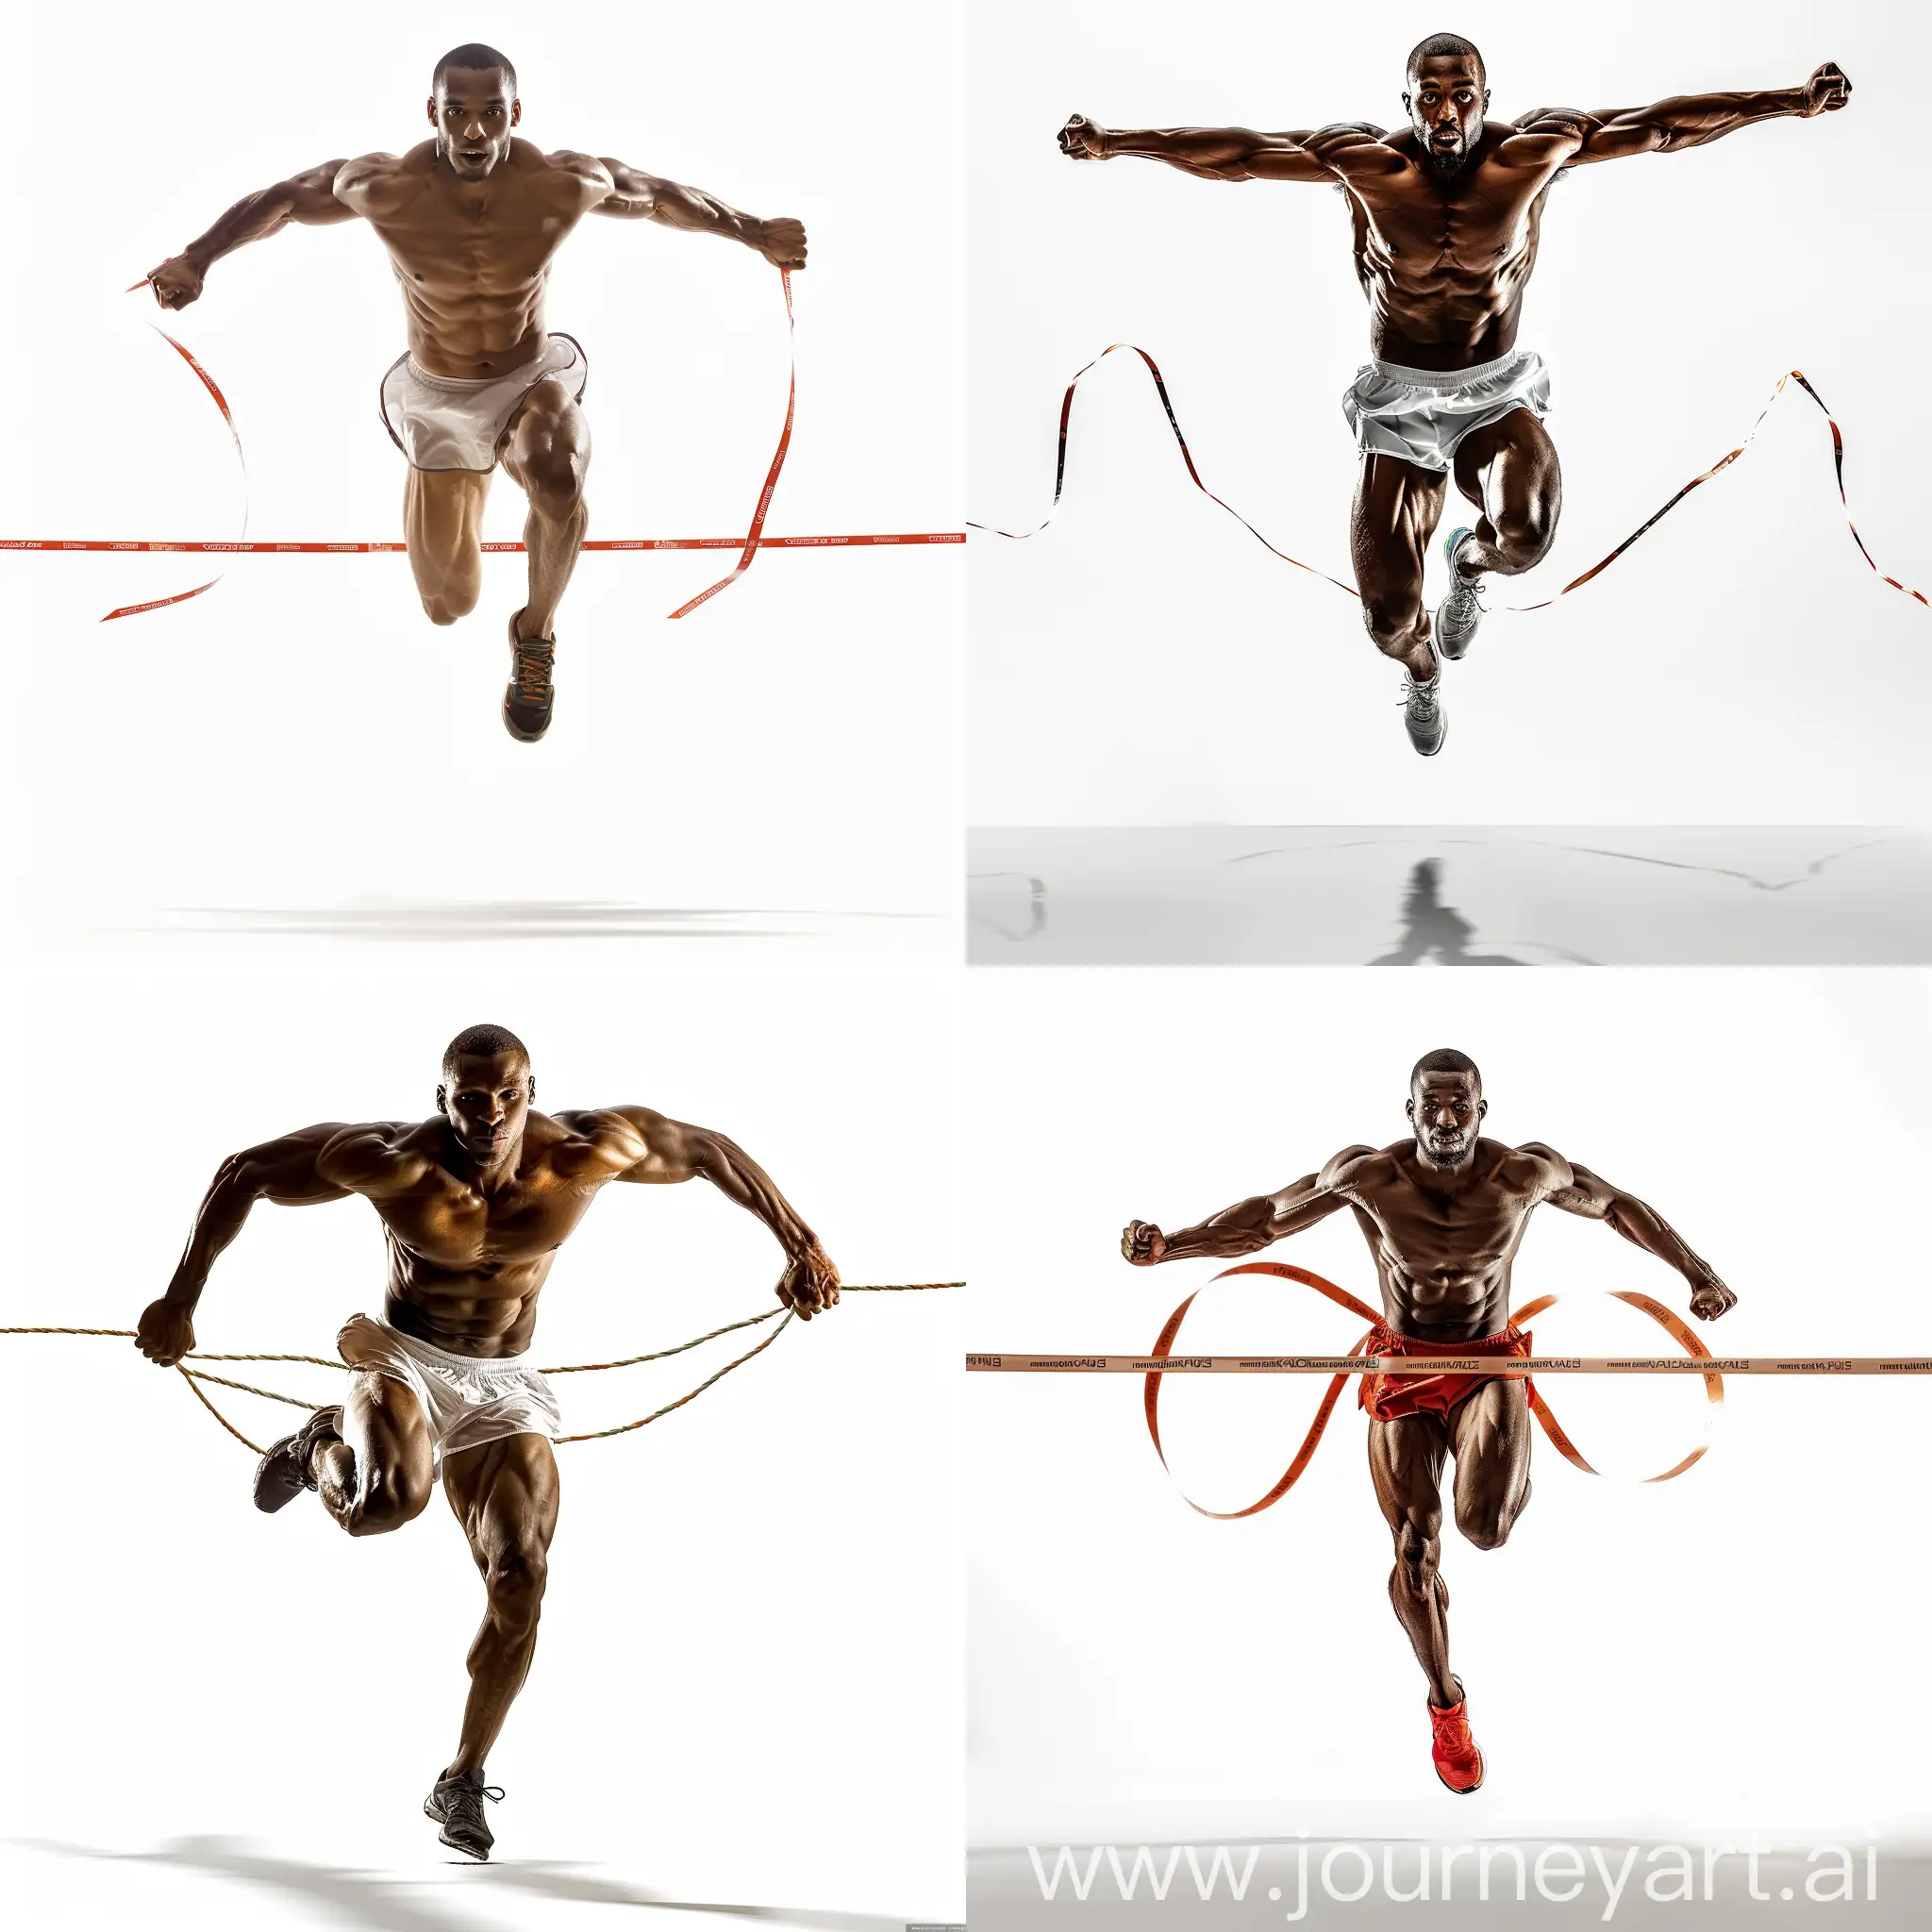 Determined-Runner-Leaping-to-Victory-in-Race-Front-View-Stock-Image